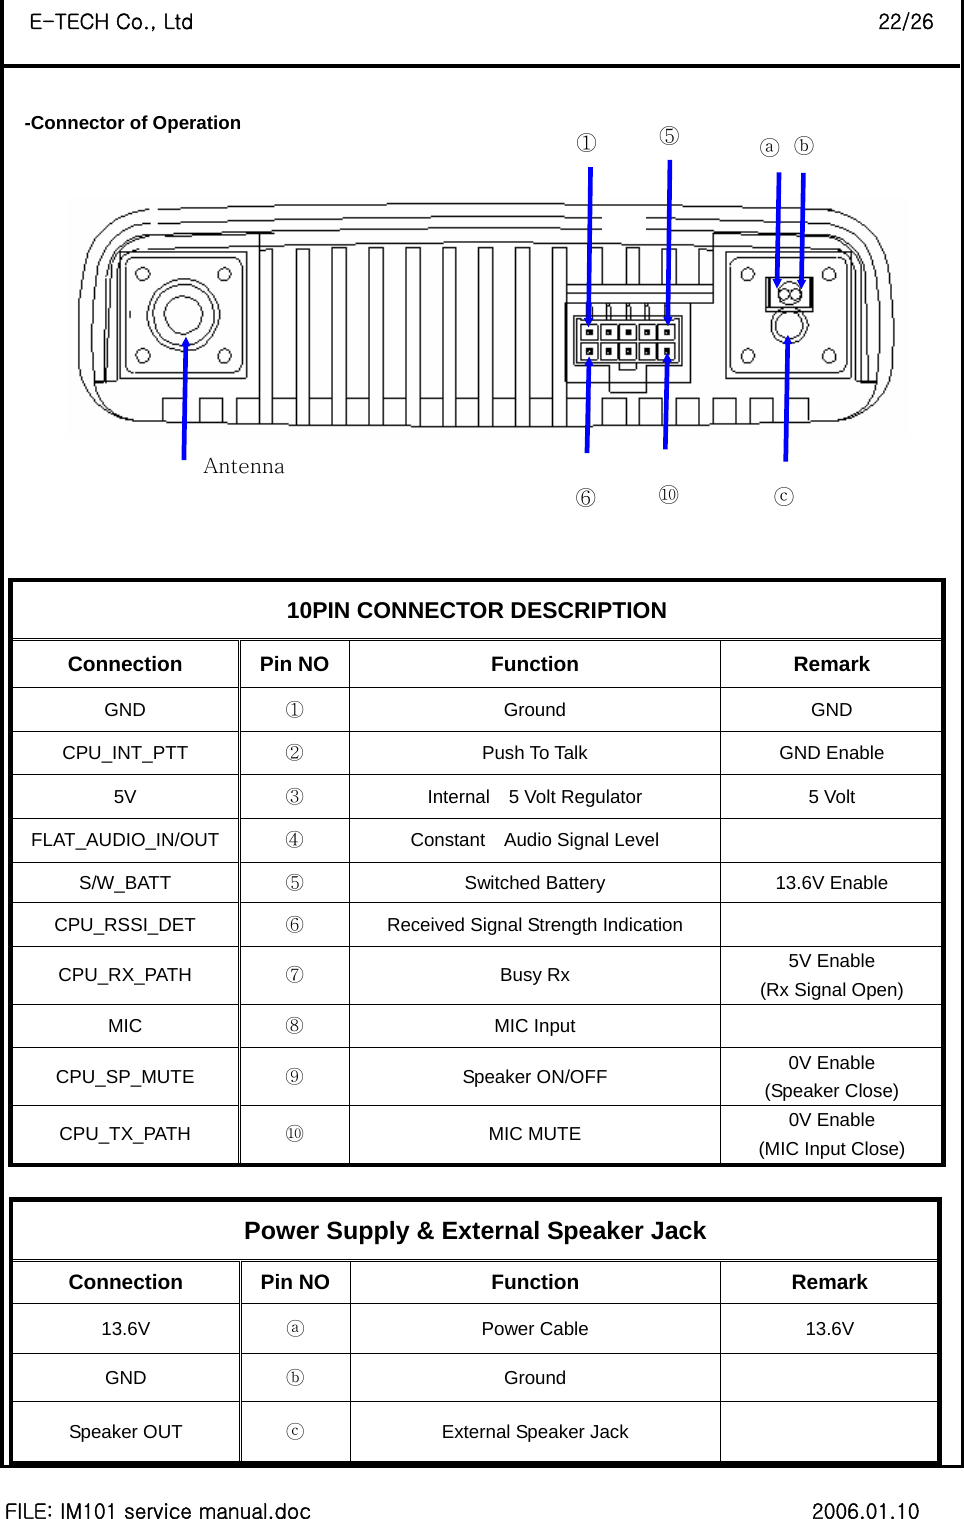 8 FILE: IM101 service manual.doc                                                 2006.01.10 E-TECH Co., Ltd                                                                   22/26  -Connector of Operation         Power Supply &amp; External Speaker Jack Connection Pin NO  Function  Remark 13.6V  ⓐ Power Cable  13.6V GND  ⓑ Ground   Speaker OUT  ⓒ  External Speaker Jack   10PIN CONNECTOR DESCRIPTION Connection Pin NO  Function  Remark GND  ① Ground  GND CPU_INT_PTT  ②  Push To Talk  GND Enable 5V  ③  Internal    5 Volt Regulator  5 Volt FLAT_AUDIO_IN/OUT  ④  Constant    Audio Signal Level   S/W_BATT  ⑤  Switched Battery  13.6V Enable CPU_RSSI_DET  ⑥  Received Signal Strength Indication   CPU_RX_PATH  ⑦ Busy Rx  5V Enable (Rx Signal Open) MIC  ⑧ MIC Input   CPU_SP_MUTE  ⑨ Speaker ON/OFF  0V Enable (Speaker Close) CPU_TX_PATH  ⑩ MIC MUTE  0V Enable (MIC Input Close) ⑤Antenna ⑥①ⓐ ⑩ⓑ ⓒ